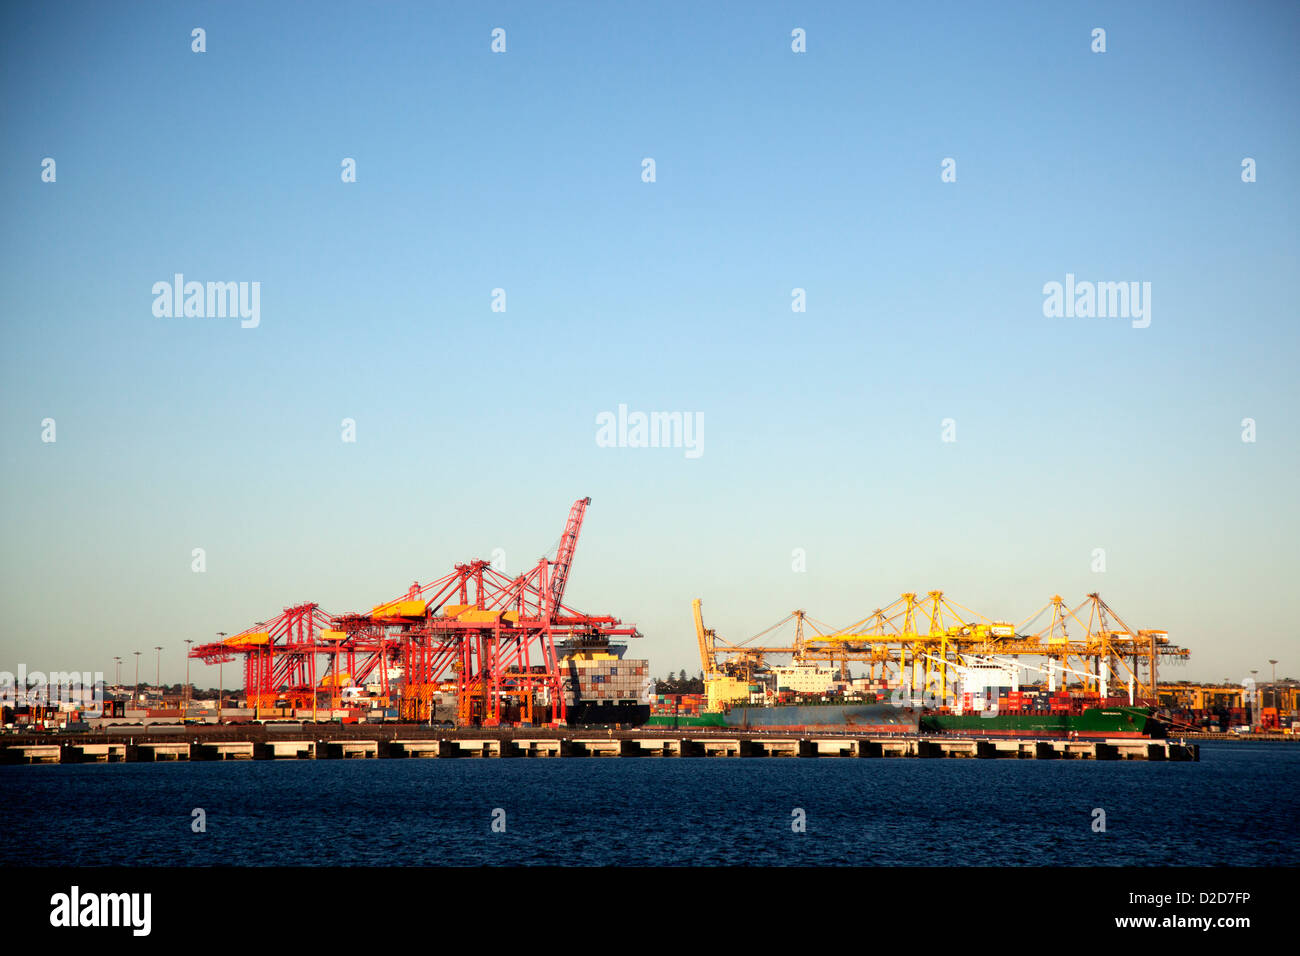 Cranes on a commercial dock Stock Photo